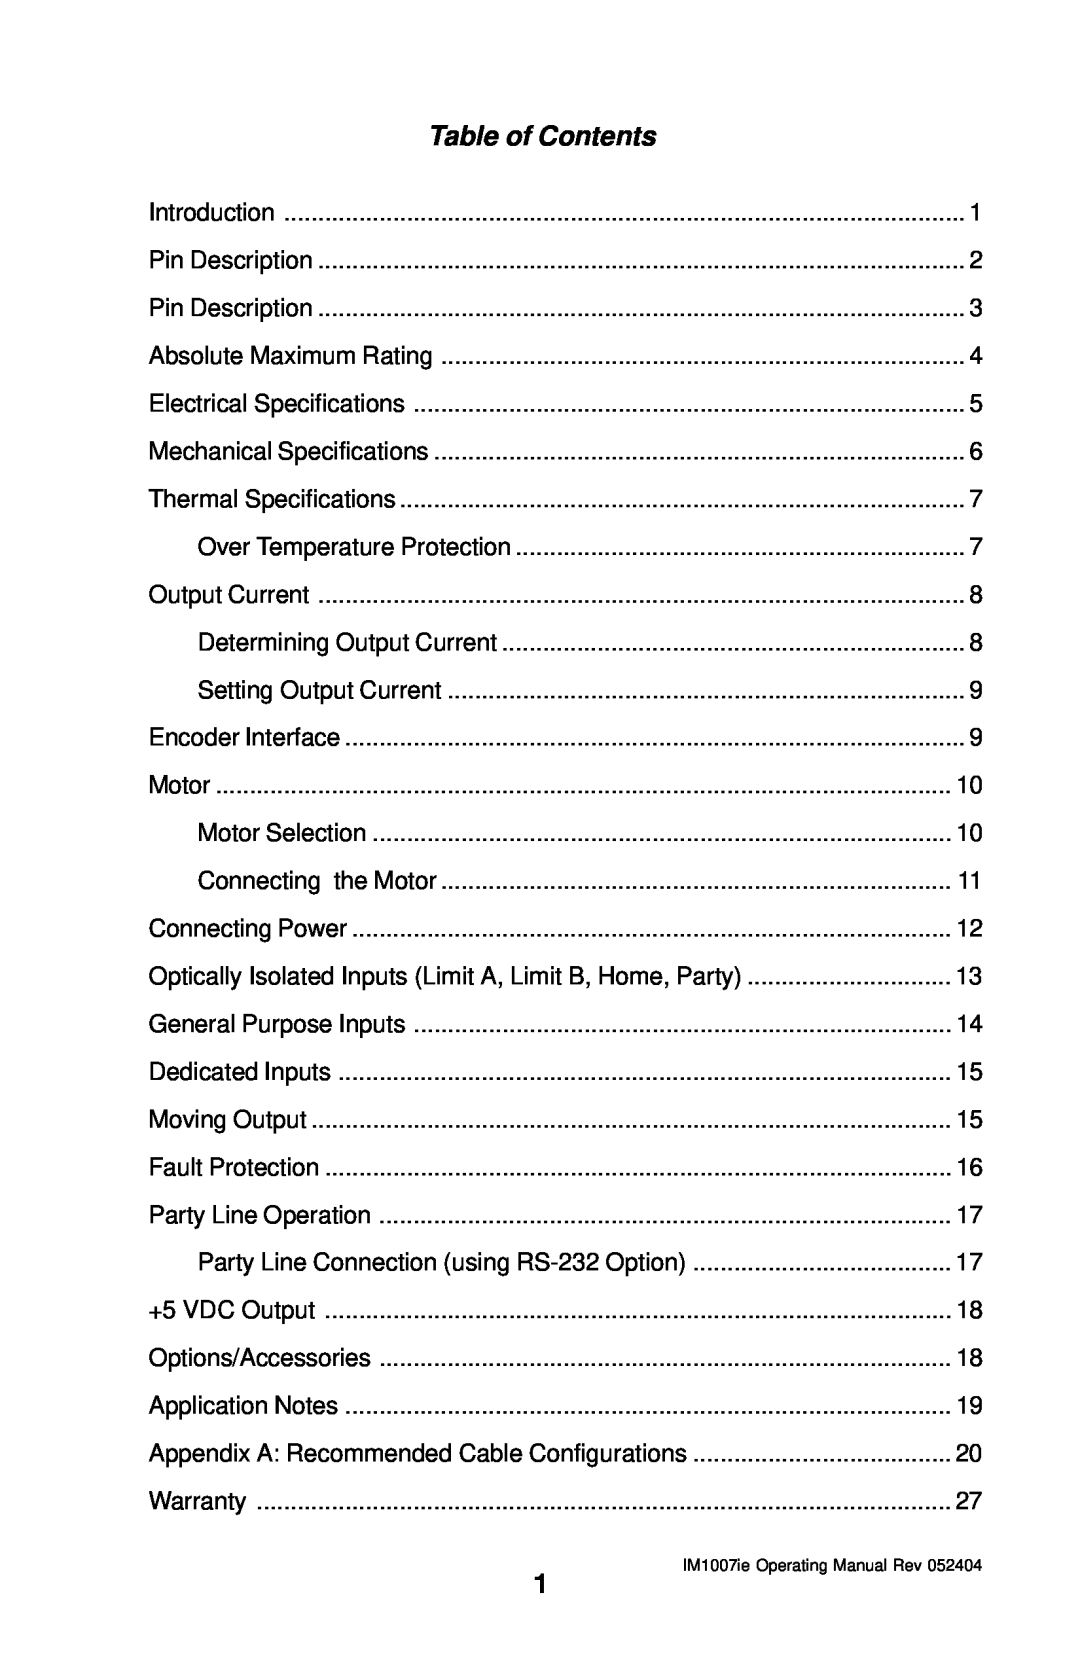 Intelligent Motion Systems IM1007 I/IE manual Table of Contents, IM1007ie Operating Manual Rev 